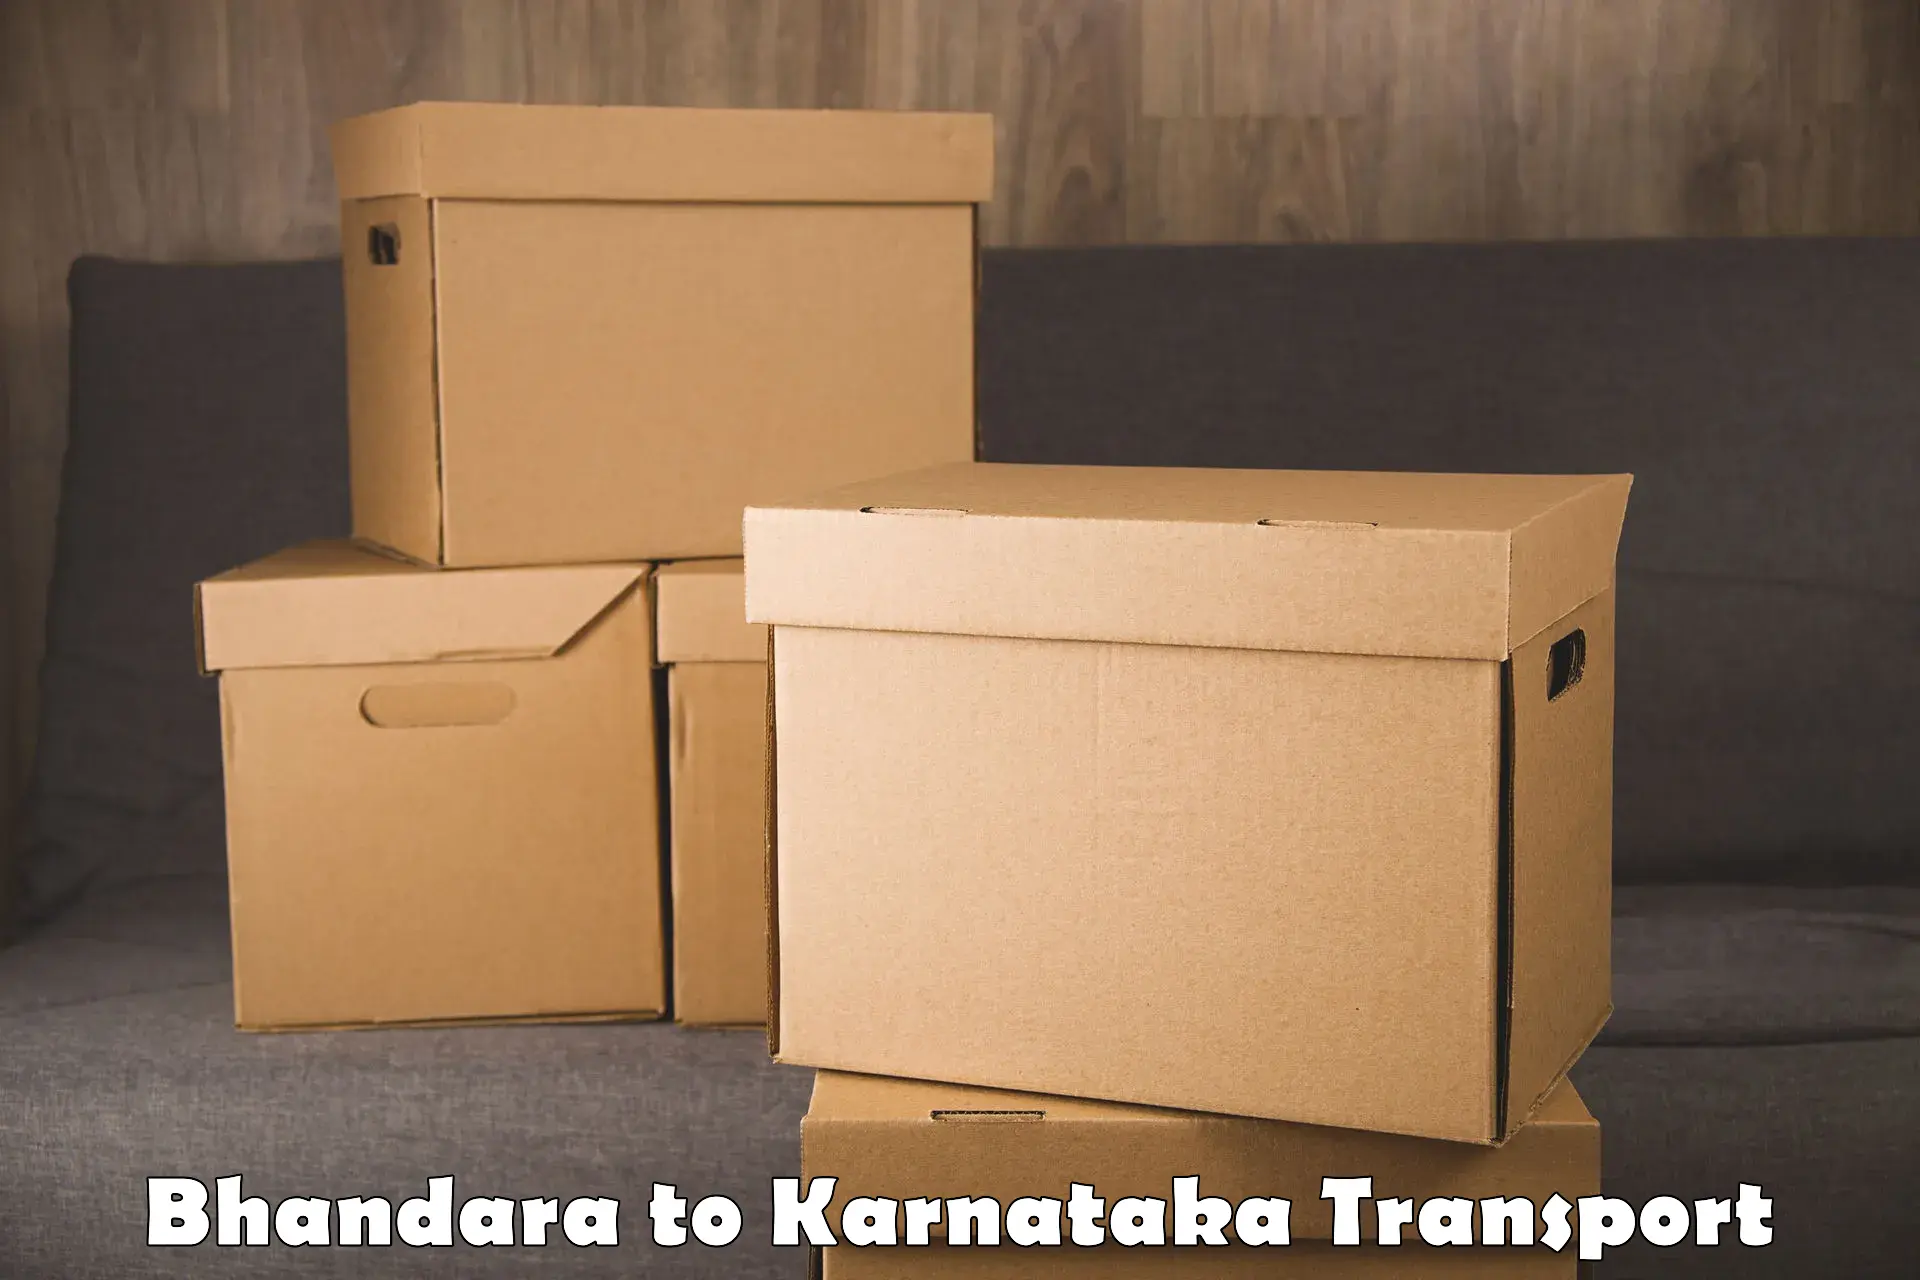 Road transport services Bhandara to Manipal Academy of Higher Education